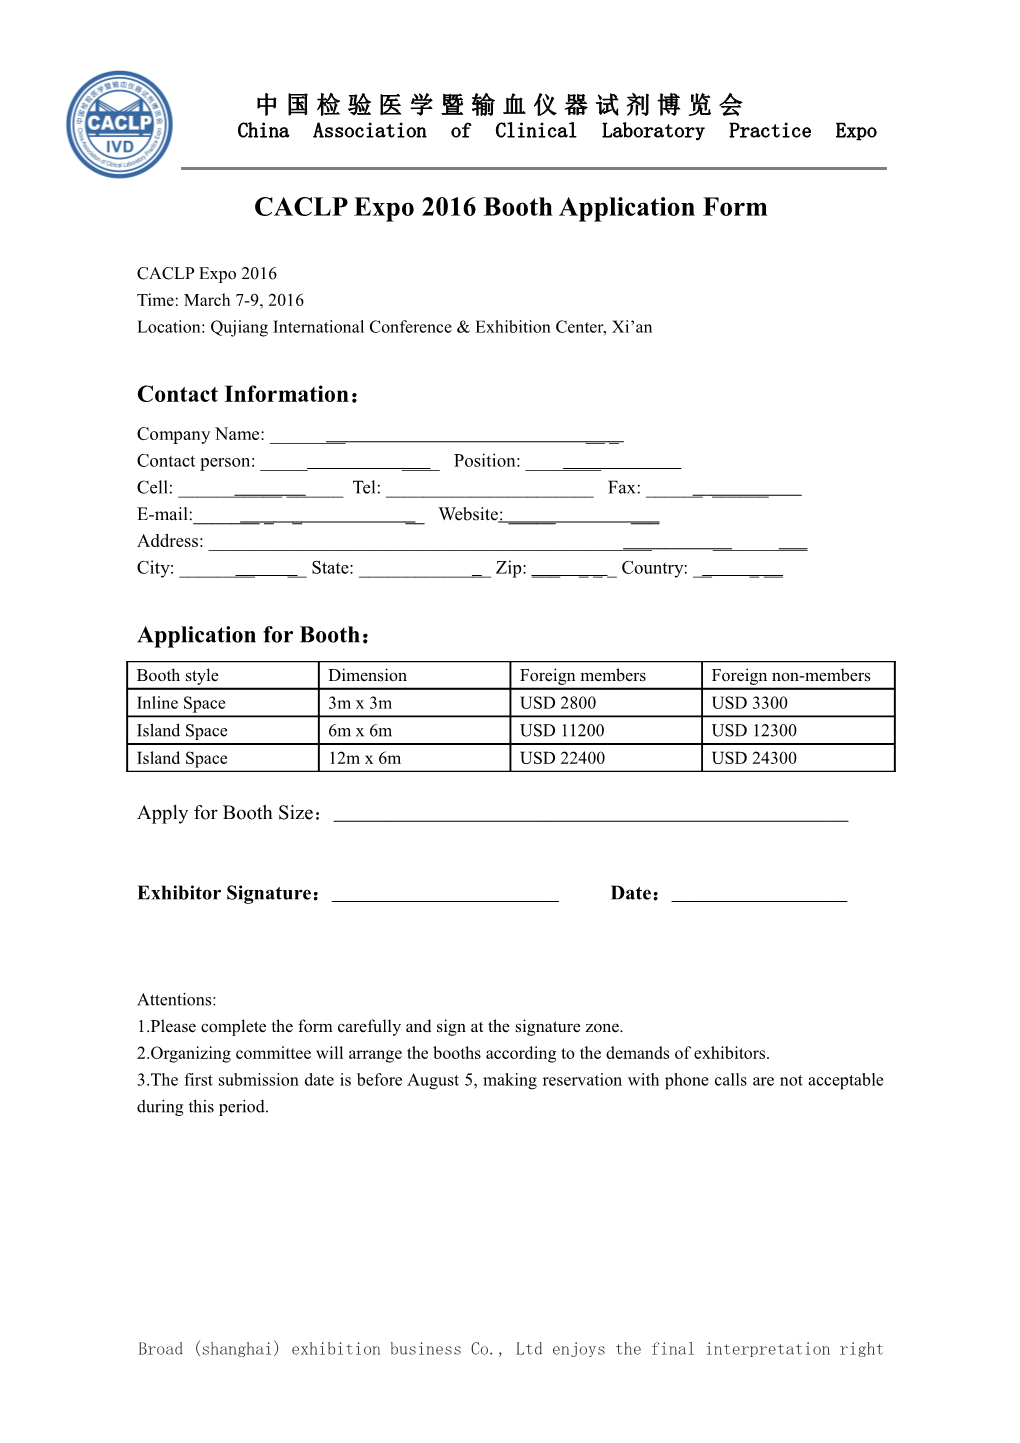 CACLP Expo 2016 Booth Application Form